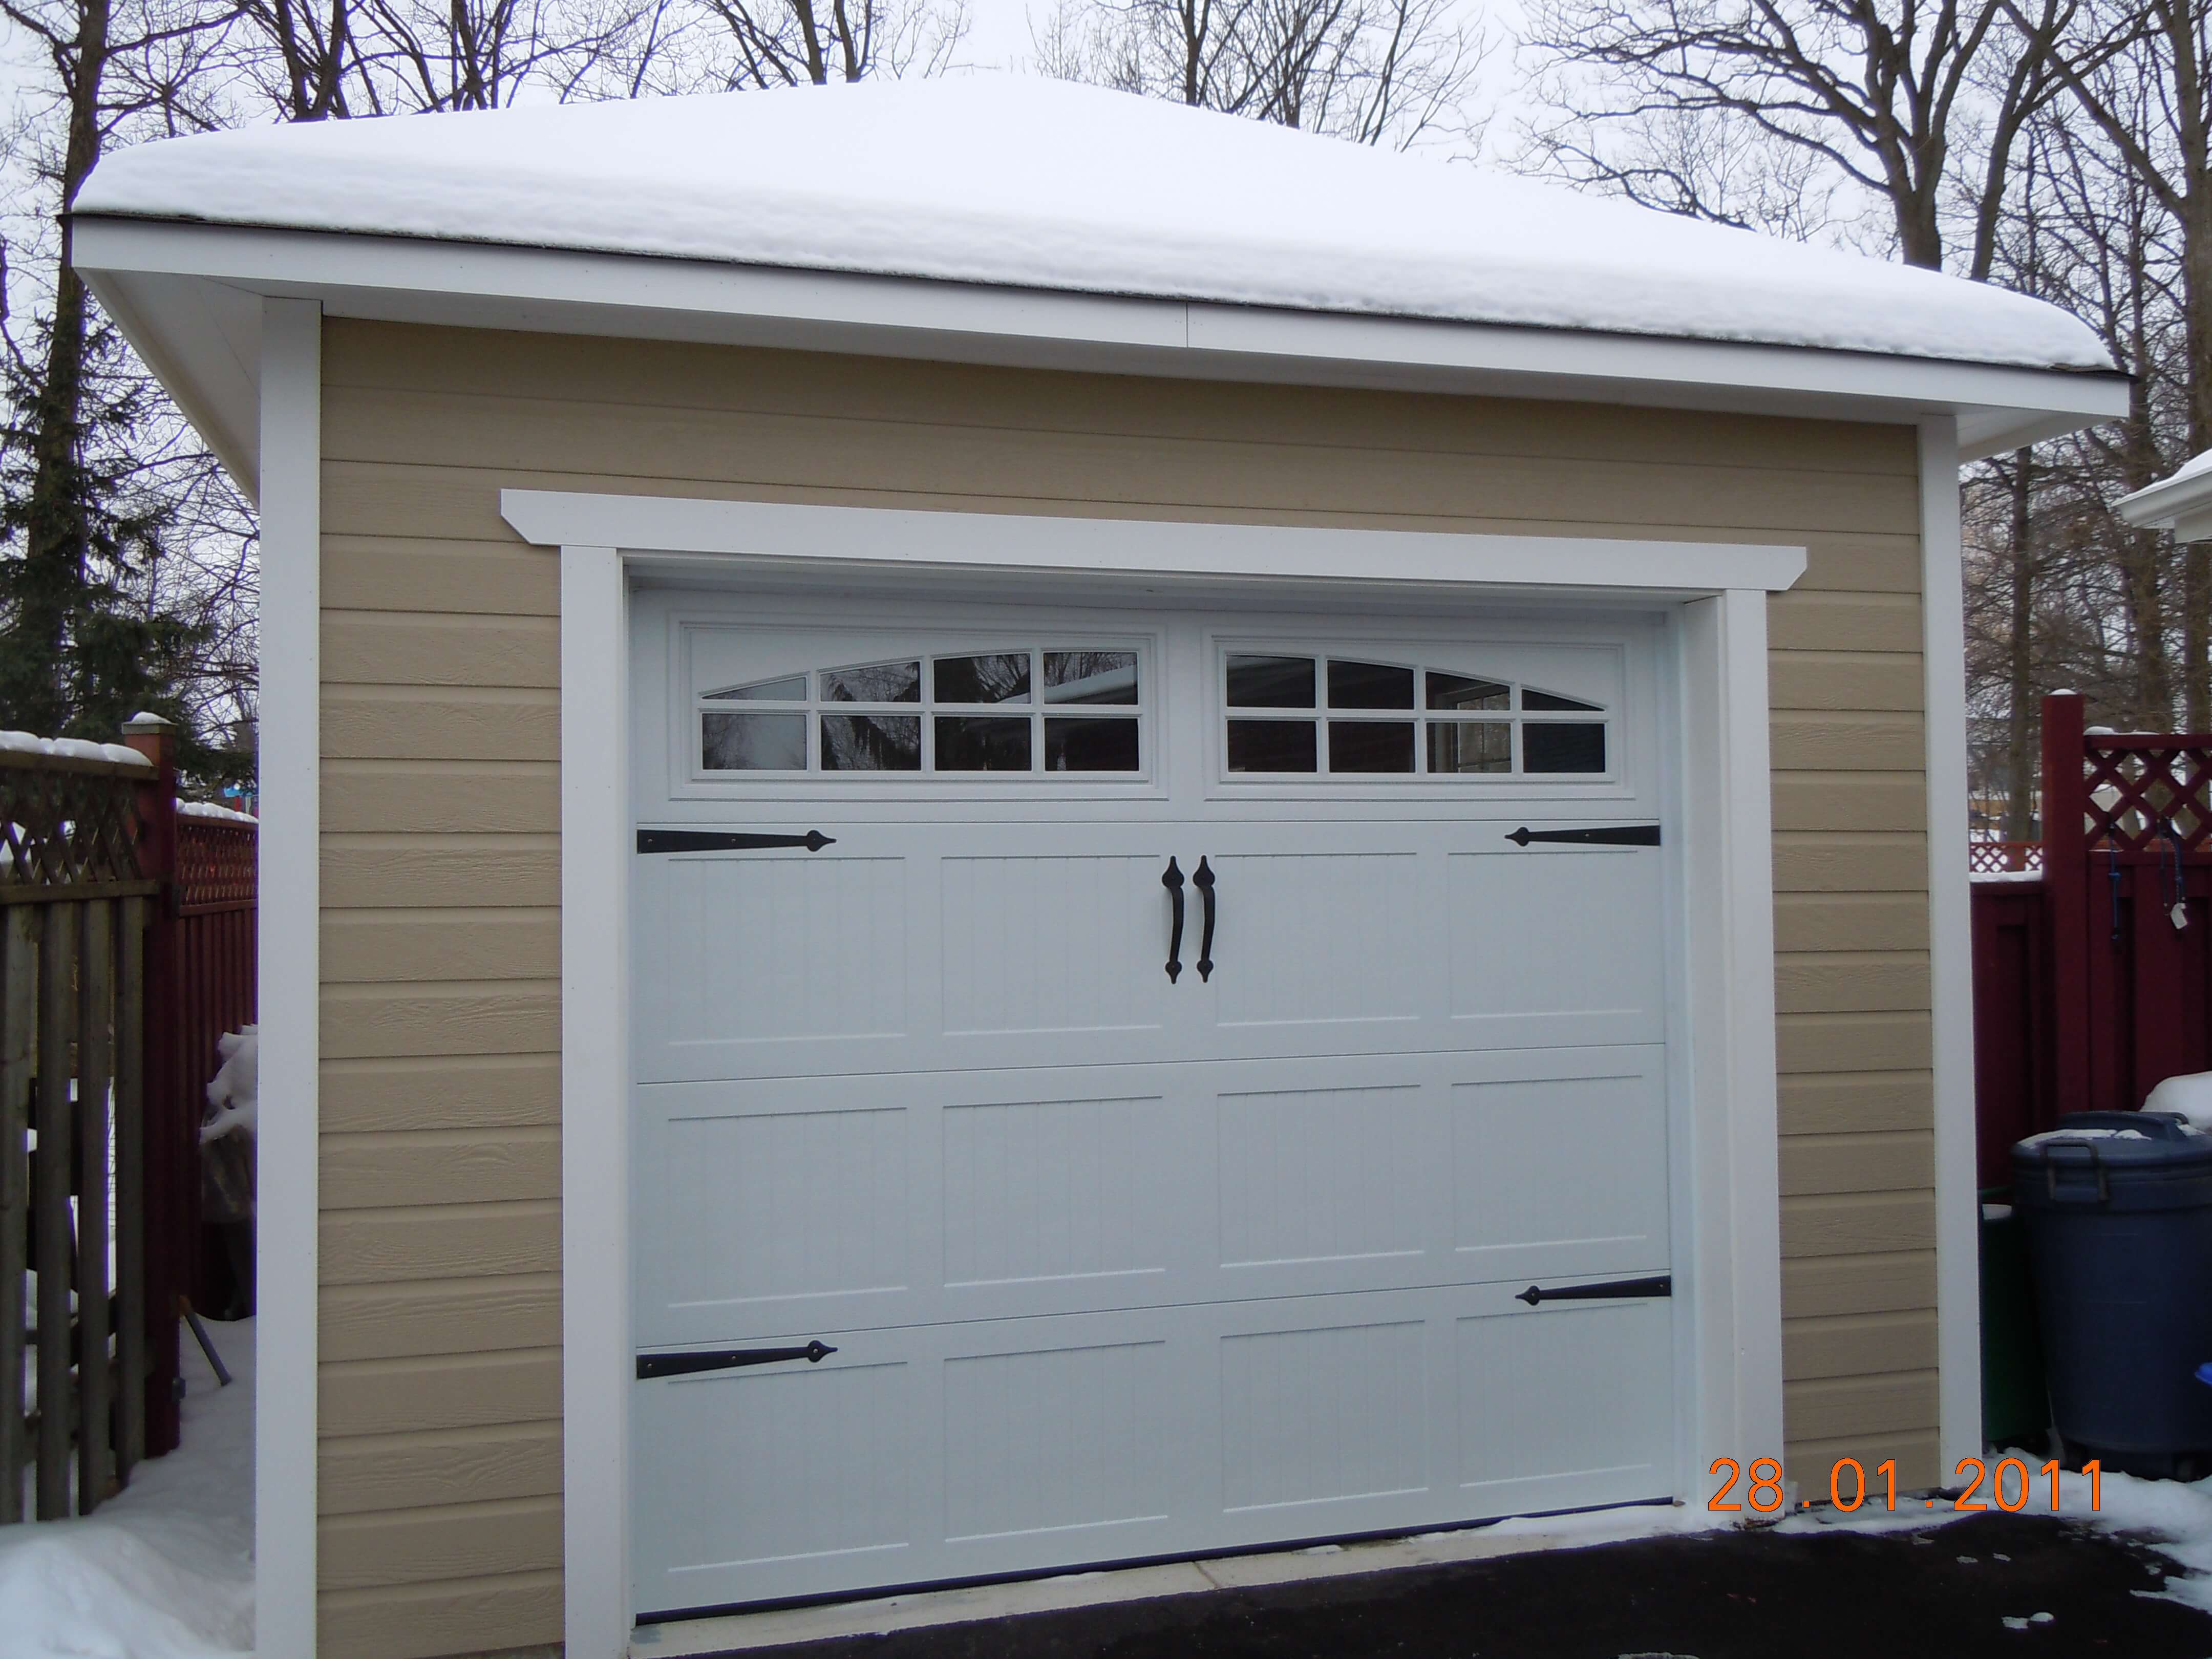 Archer garage 12 x 20 with Large Single Hung Window in Toronto Ontario. ID number 210027-2